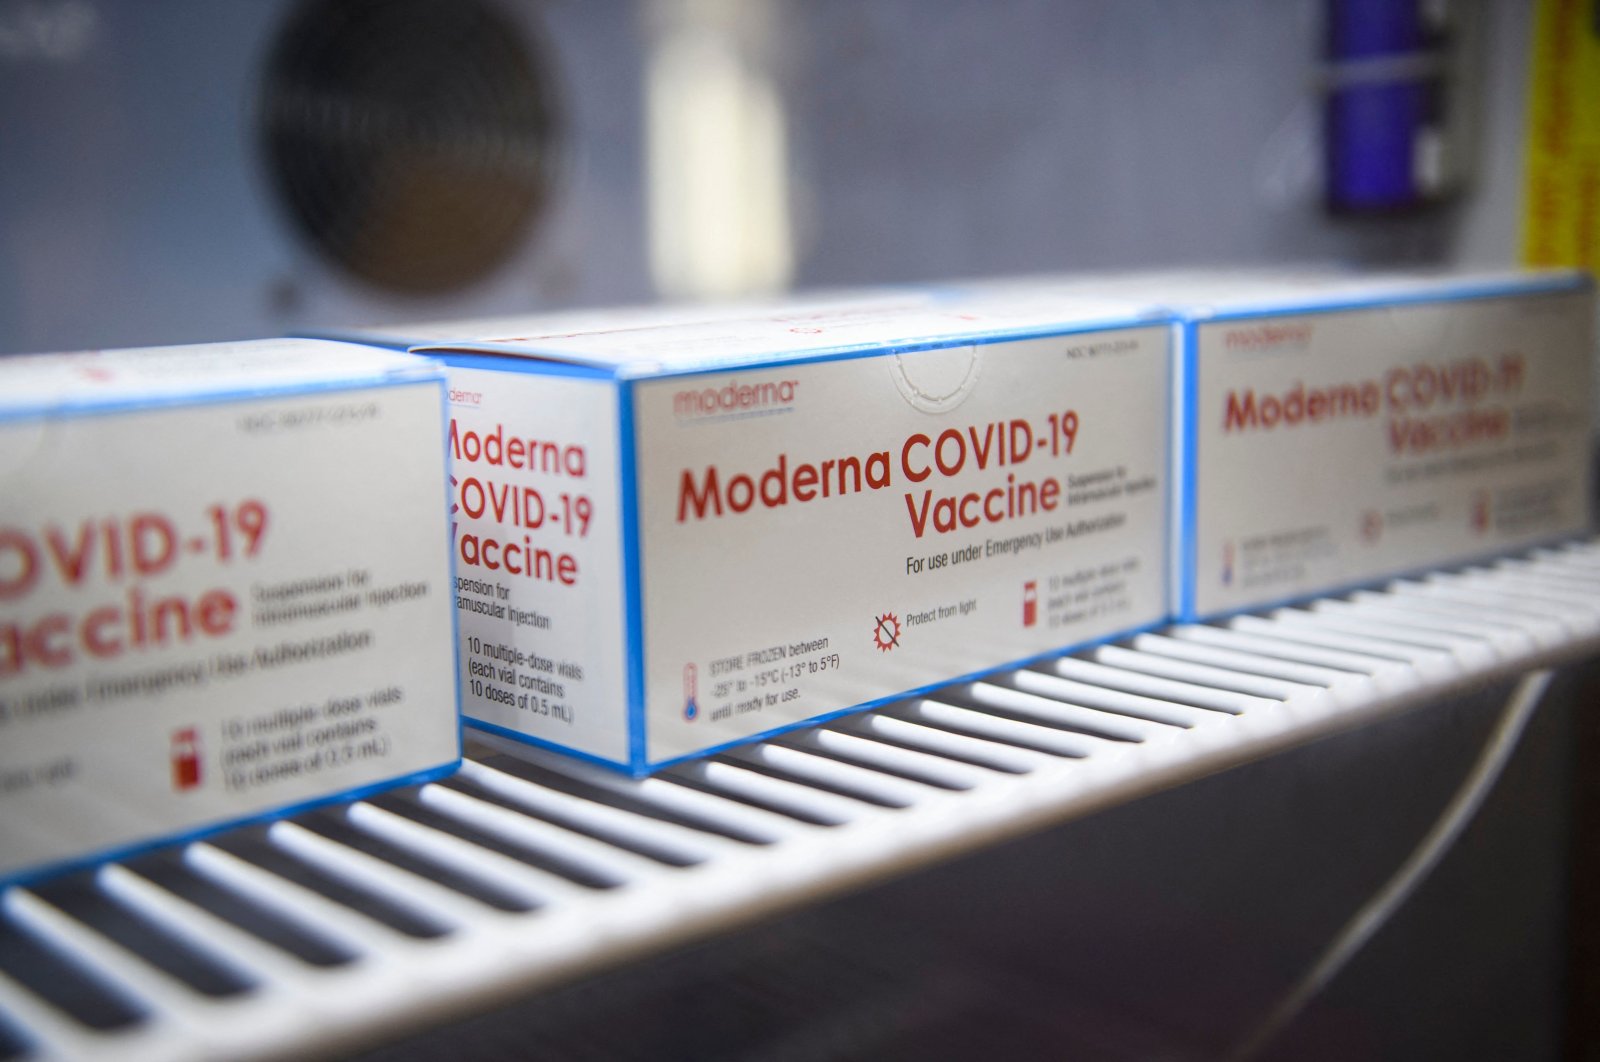 Boxes containing vials of the Moderna COVID-19 vaccine line the shelves at the Kedren Community Health Center in Los Angeles, California, Oct. 14, 2021. (AFP Photo)